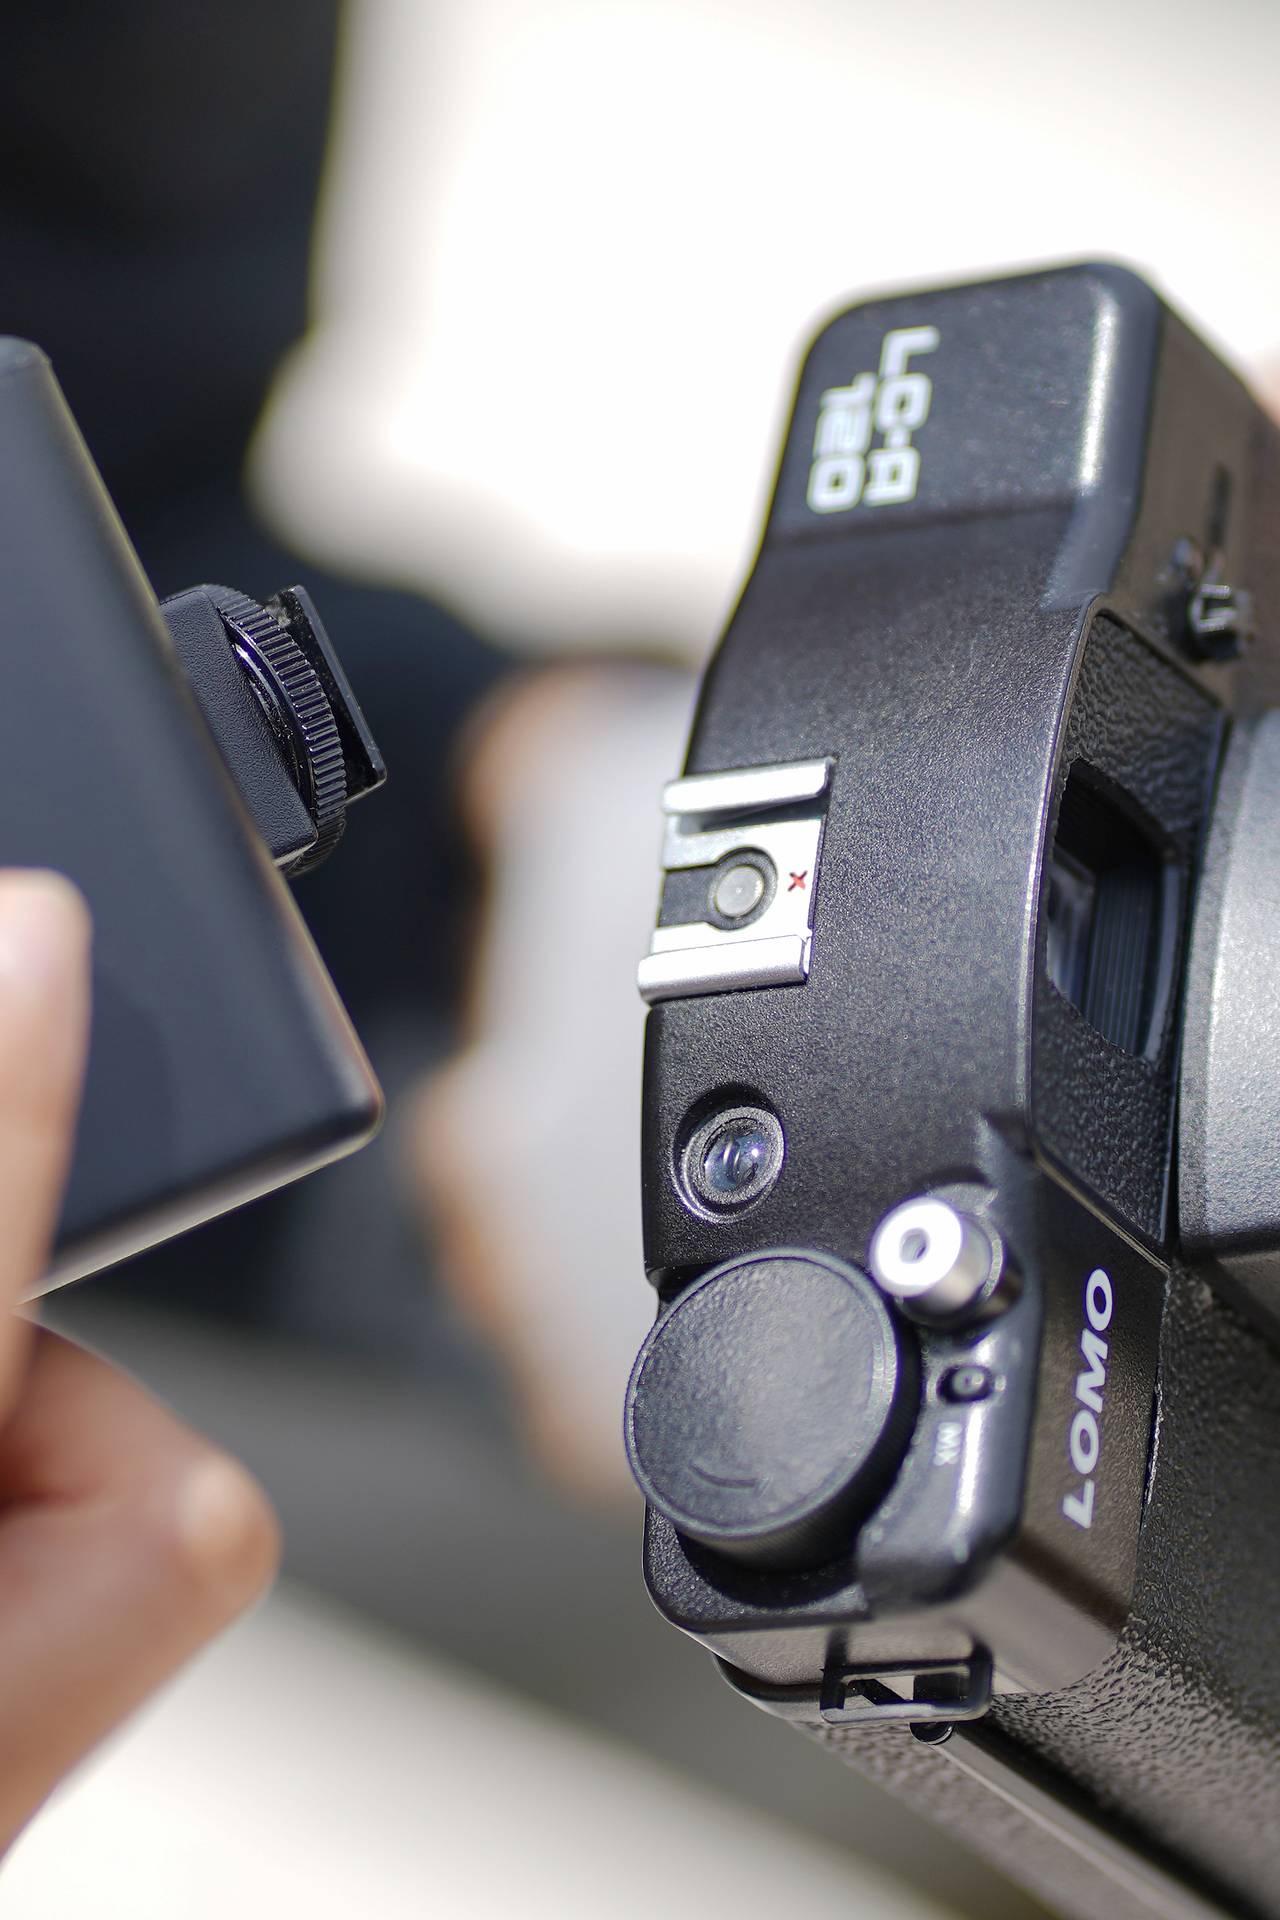 Get flashy with it. Thanks to the hot shoe mount you can light up your shots with your favorite flashes.